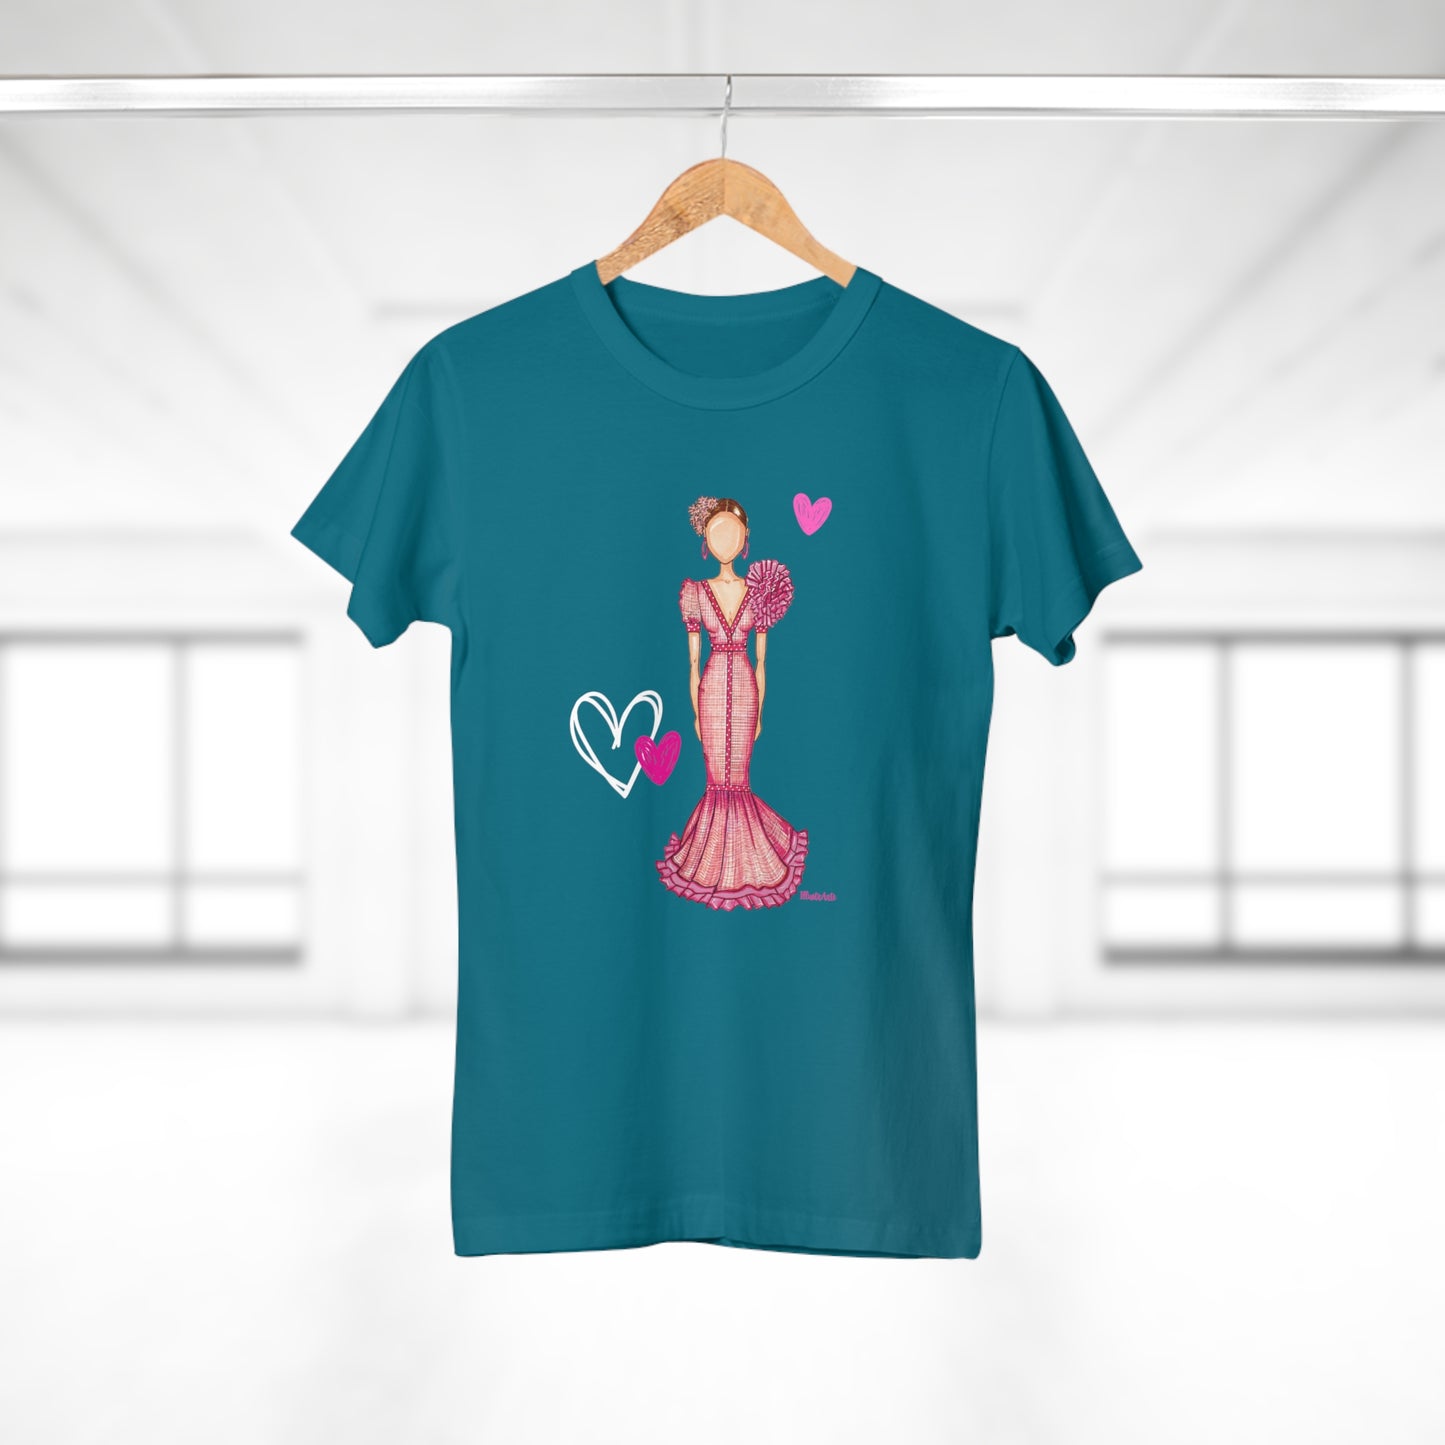 a t - shirt with a woman in a pink dress on a hanger